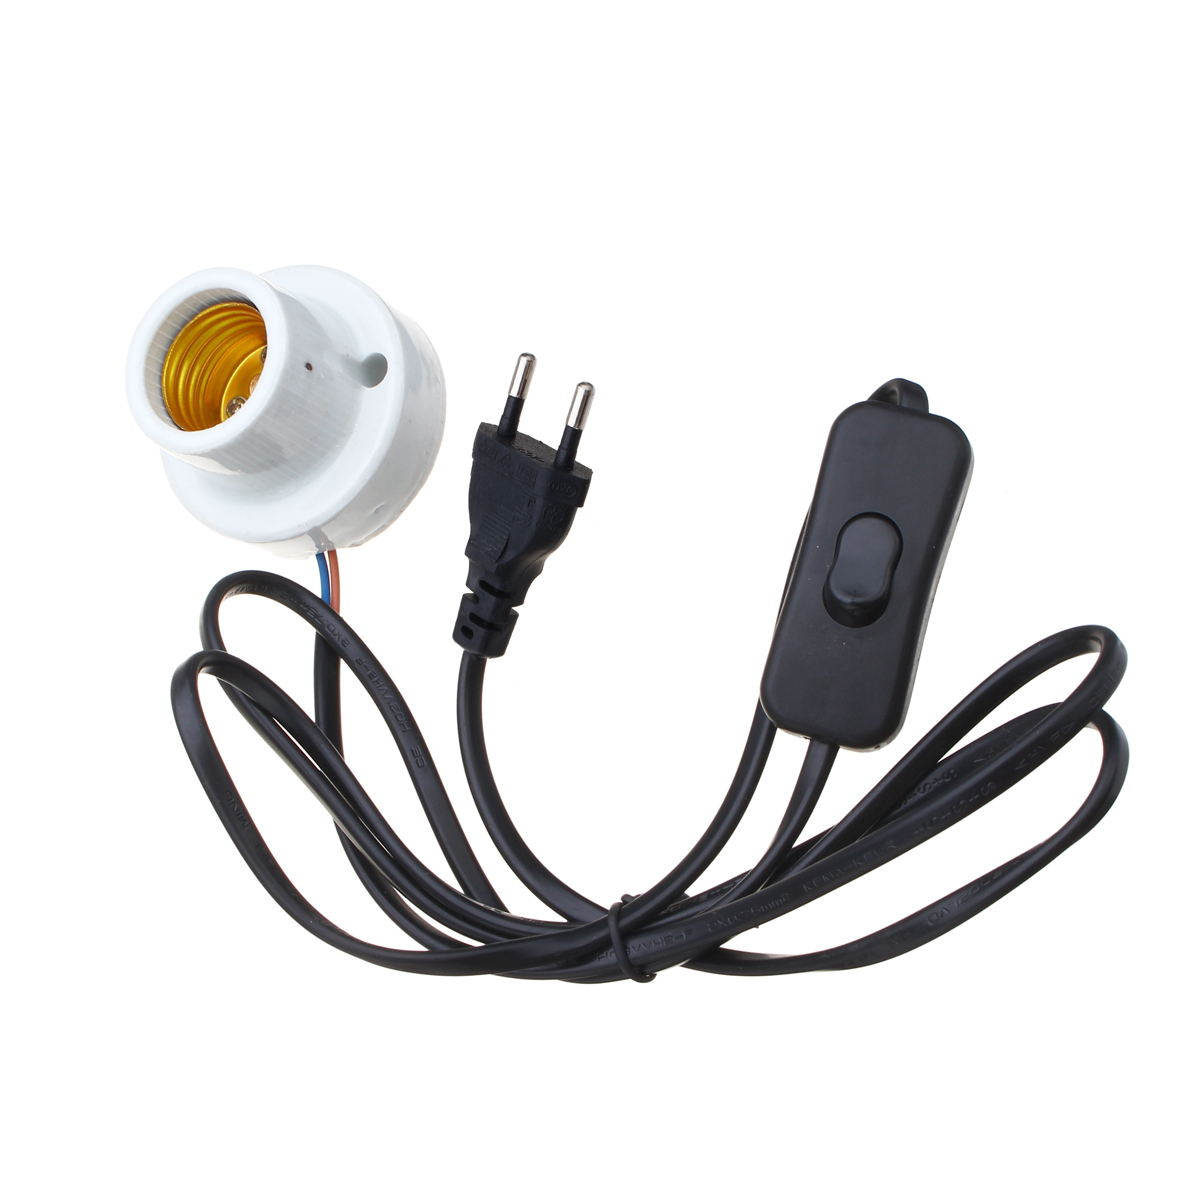 E27-Straight-Mouth-Reptile-Ceramic-Heat-Lampholder-Bulb-Adapter-with-Switch-AC110-240V-1287370-3